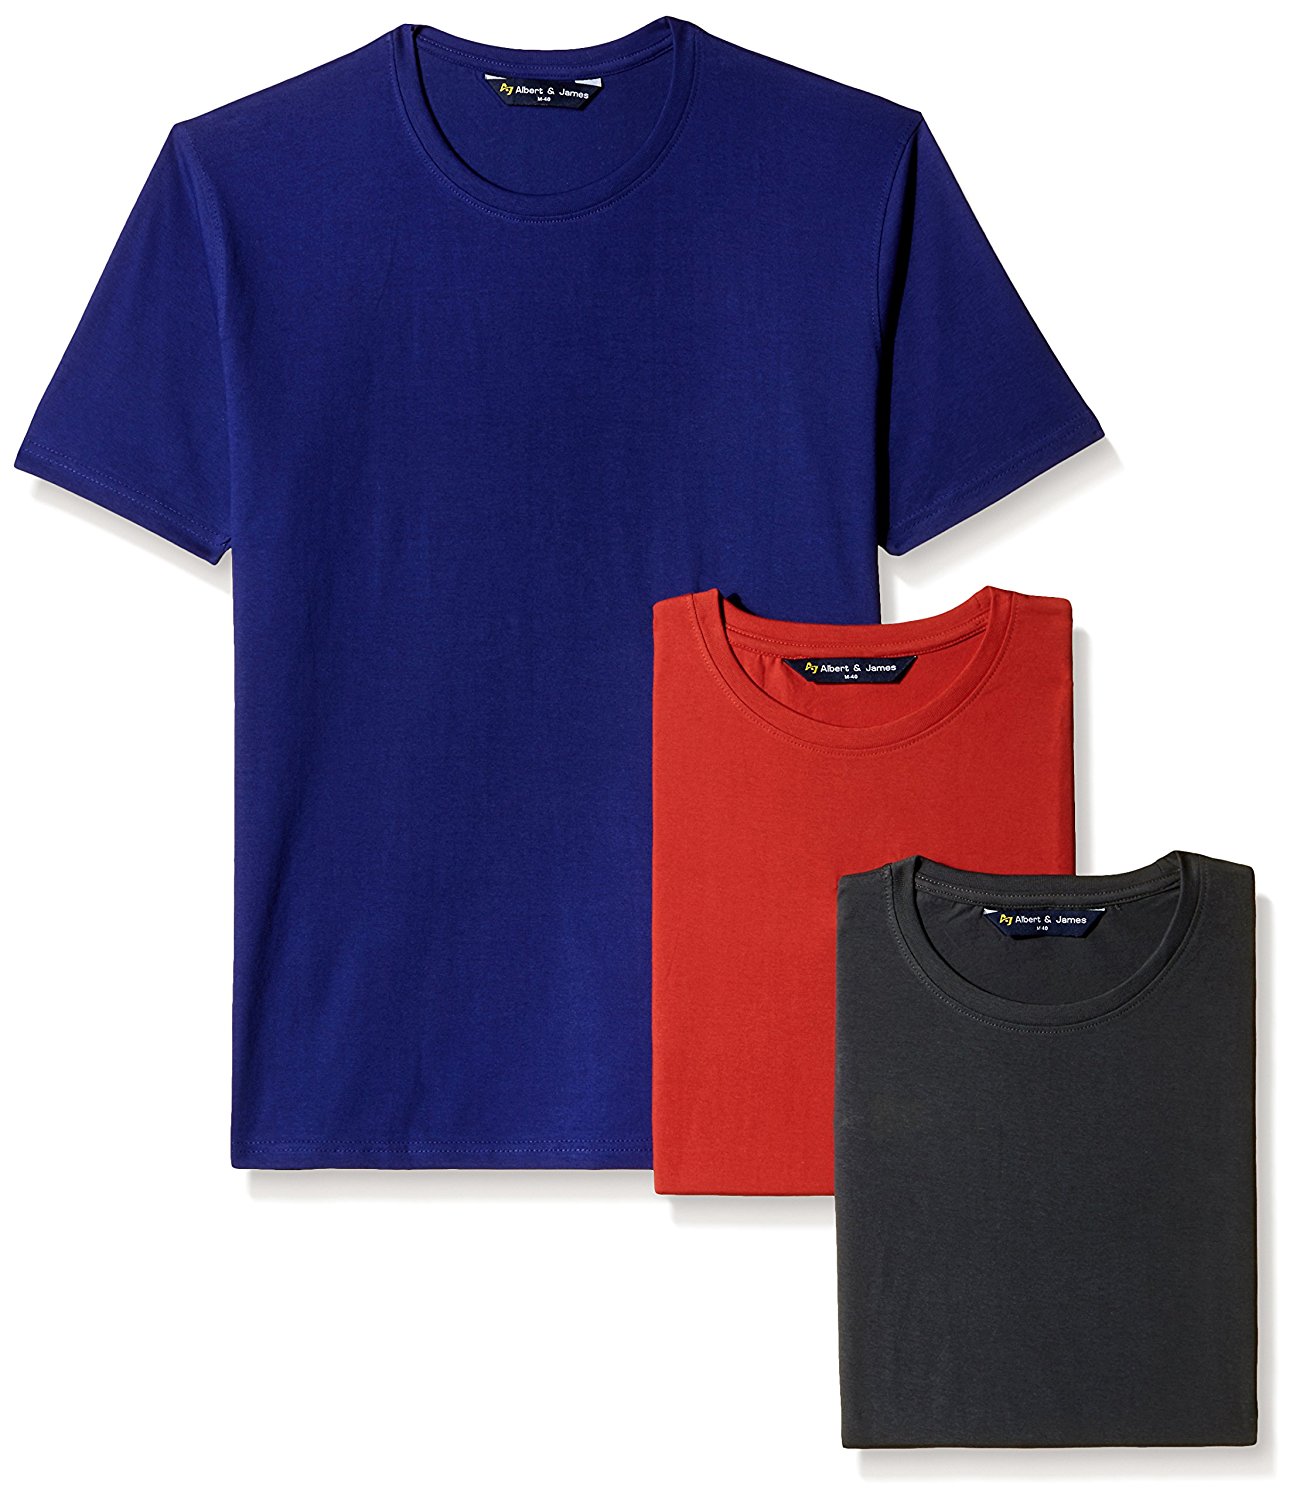 Amazon: Albert and James Men’s T-Shirt (Pack of 3) at Rs 299